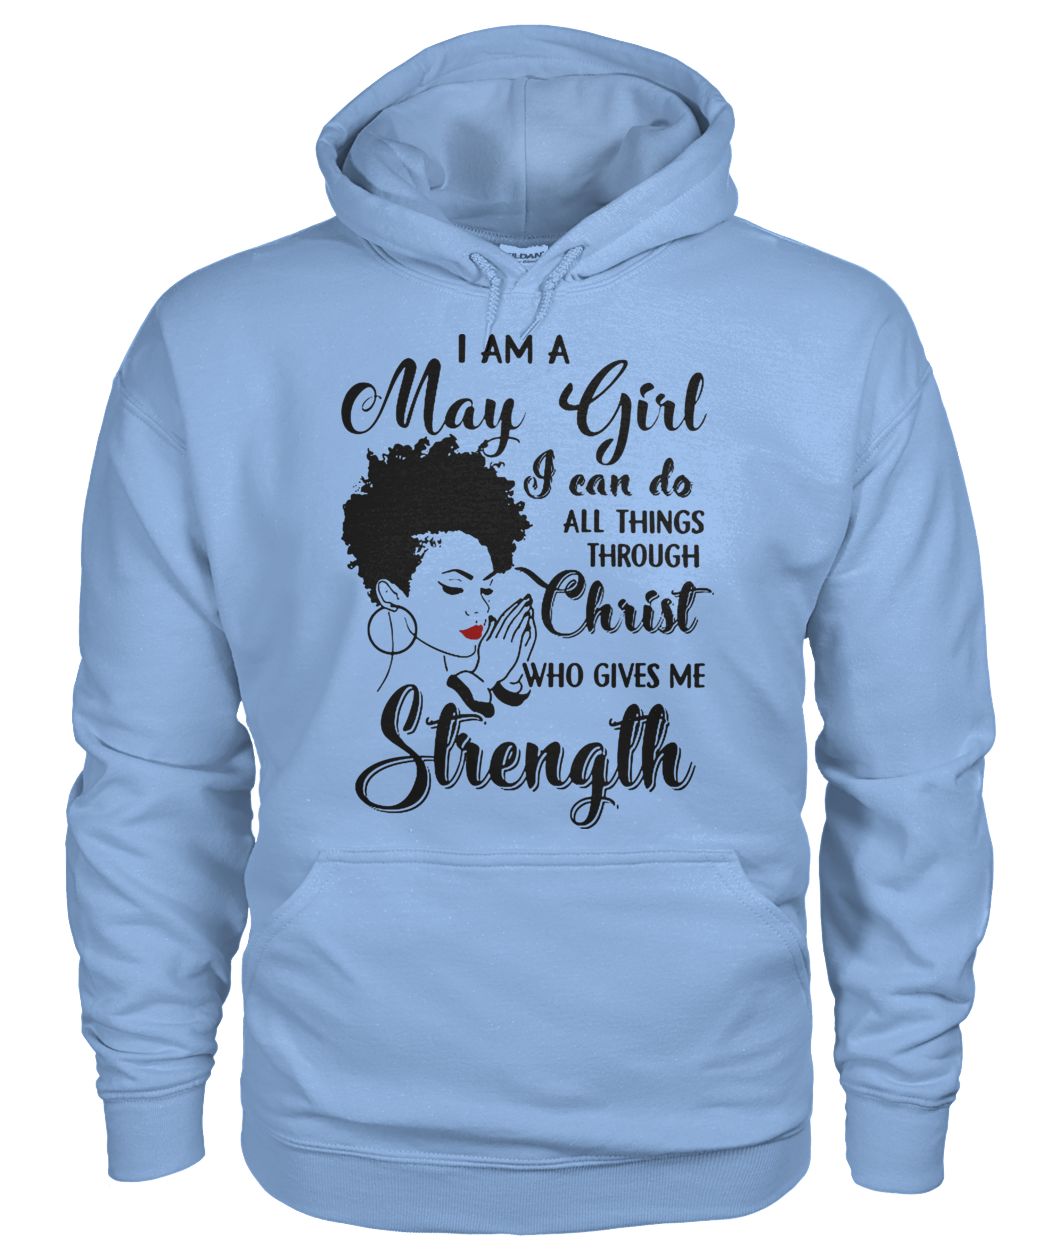 I am a may girl I can do all things through christ who gives me strength gildan hoodie